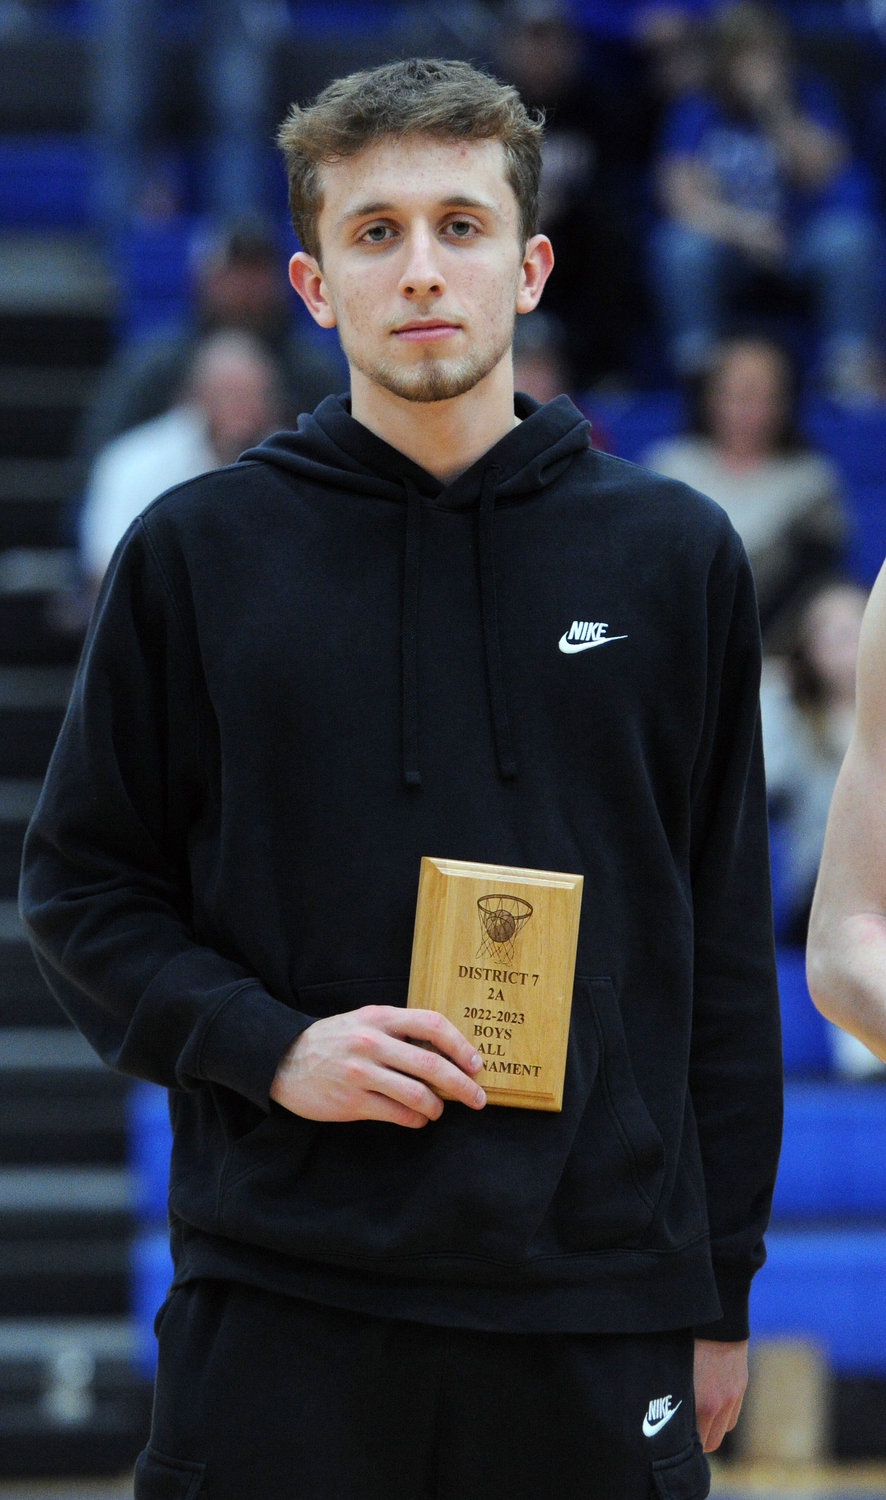 For his efforts in the District 7-AA tournament, Bray McCown was named to the All-Tournament team.